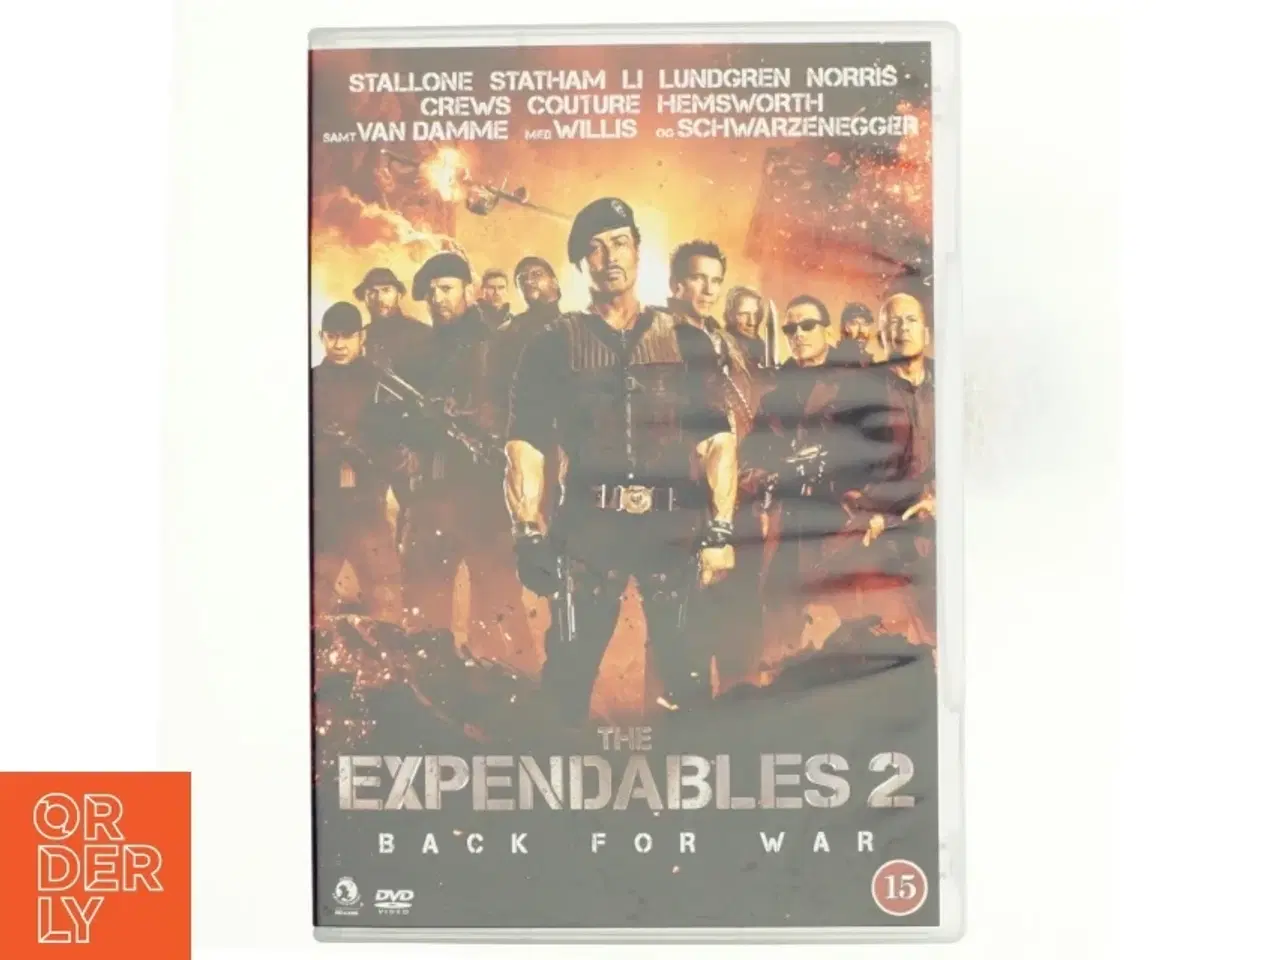 Billede 1 - The Expendables 2 (dvd)